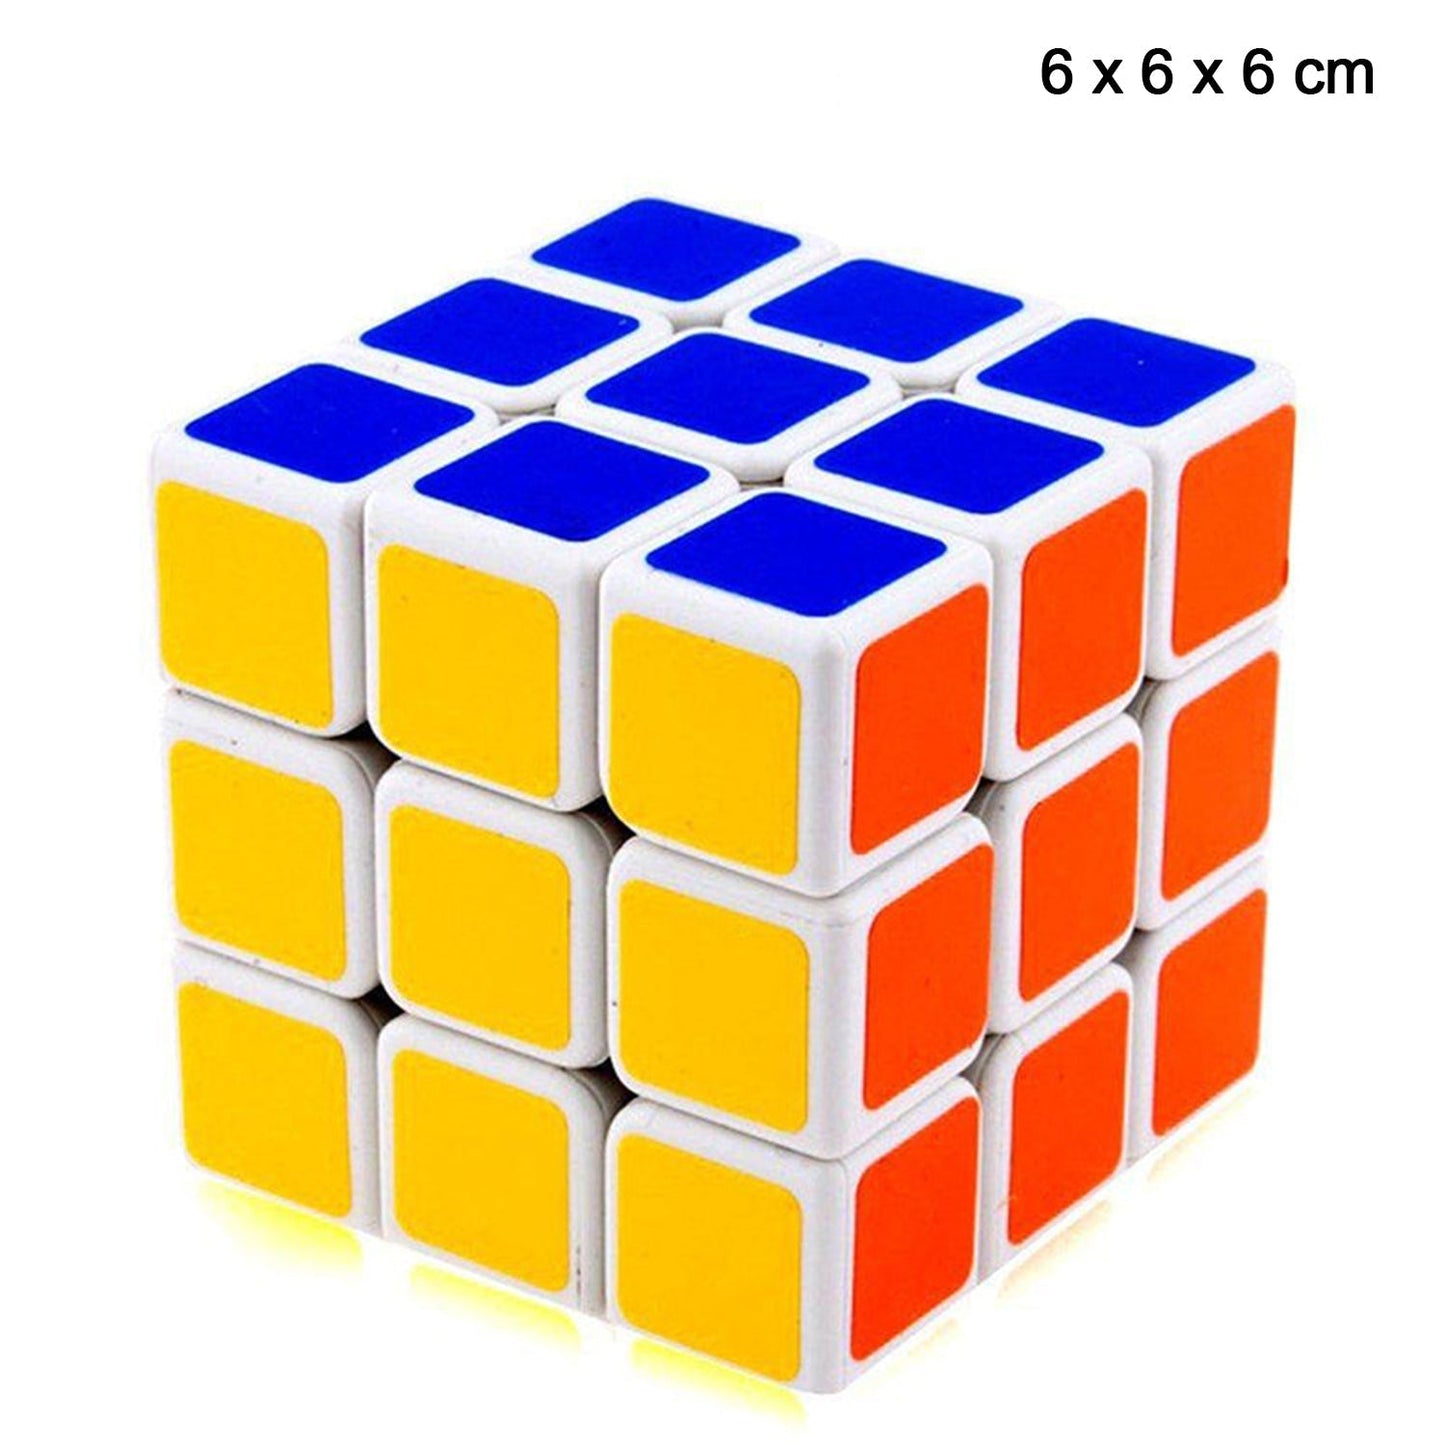 1072 High Speed Puzzle Cube 